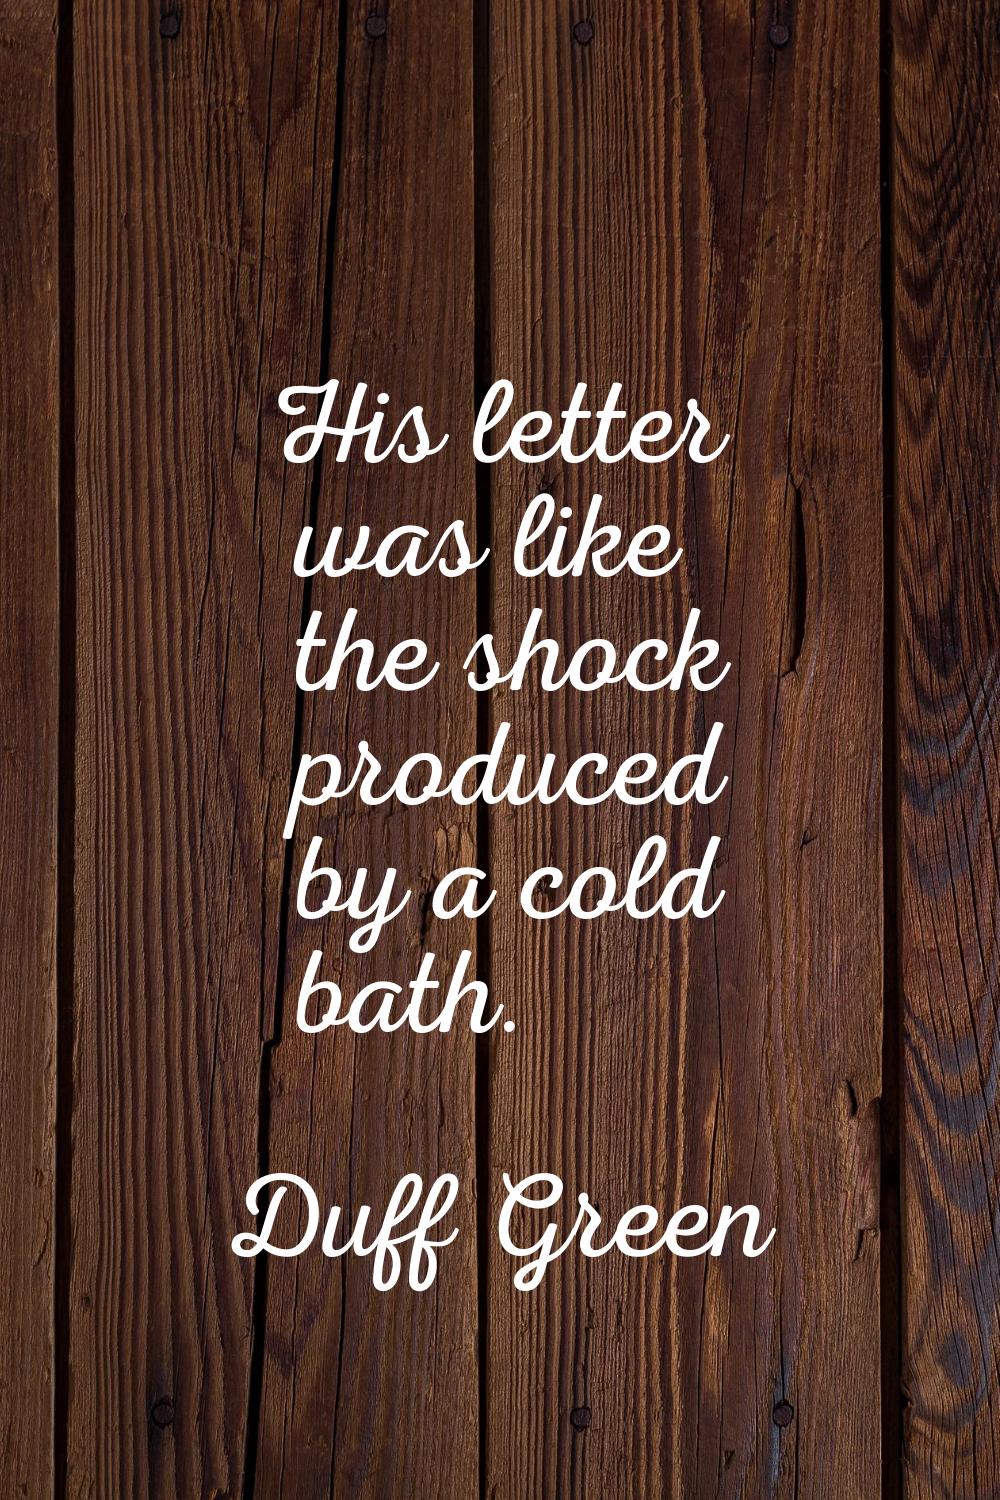 His letter was like the shock produced by a cold bath.